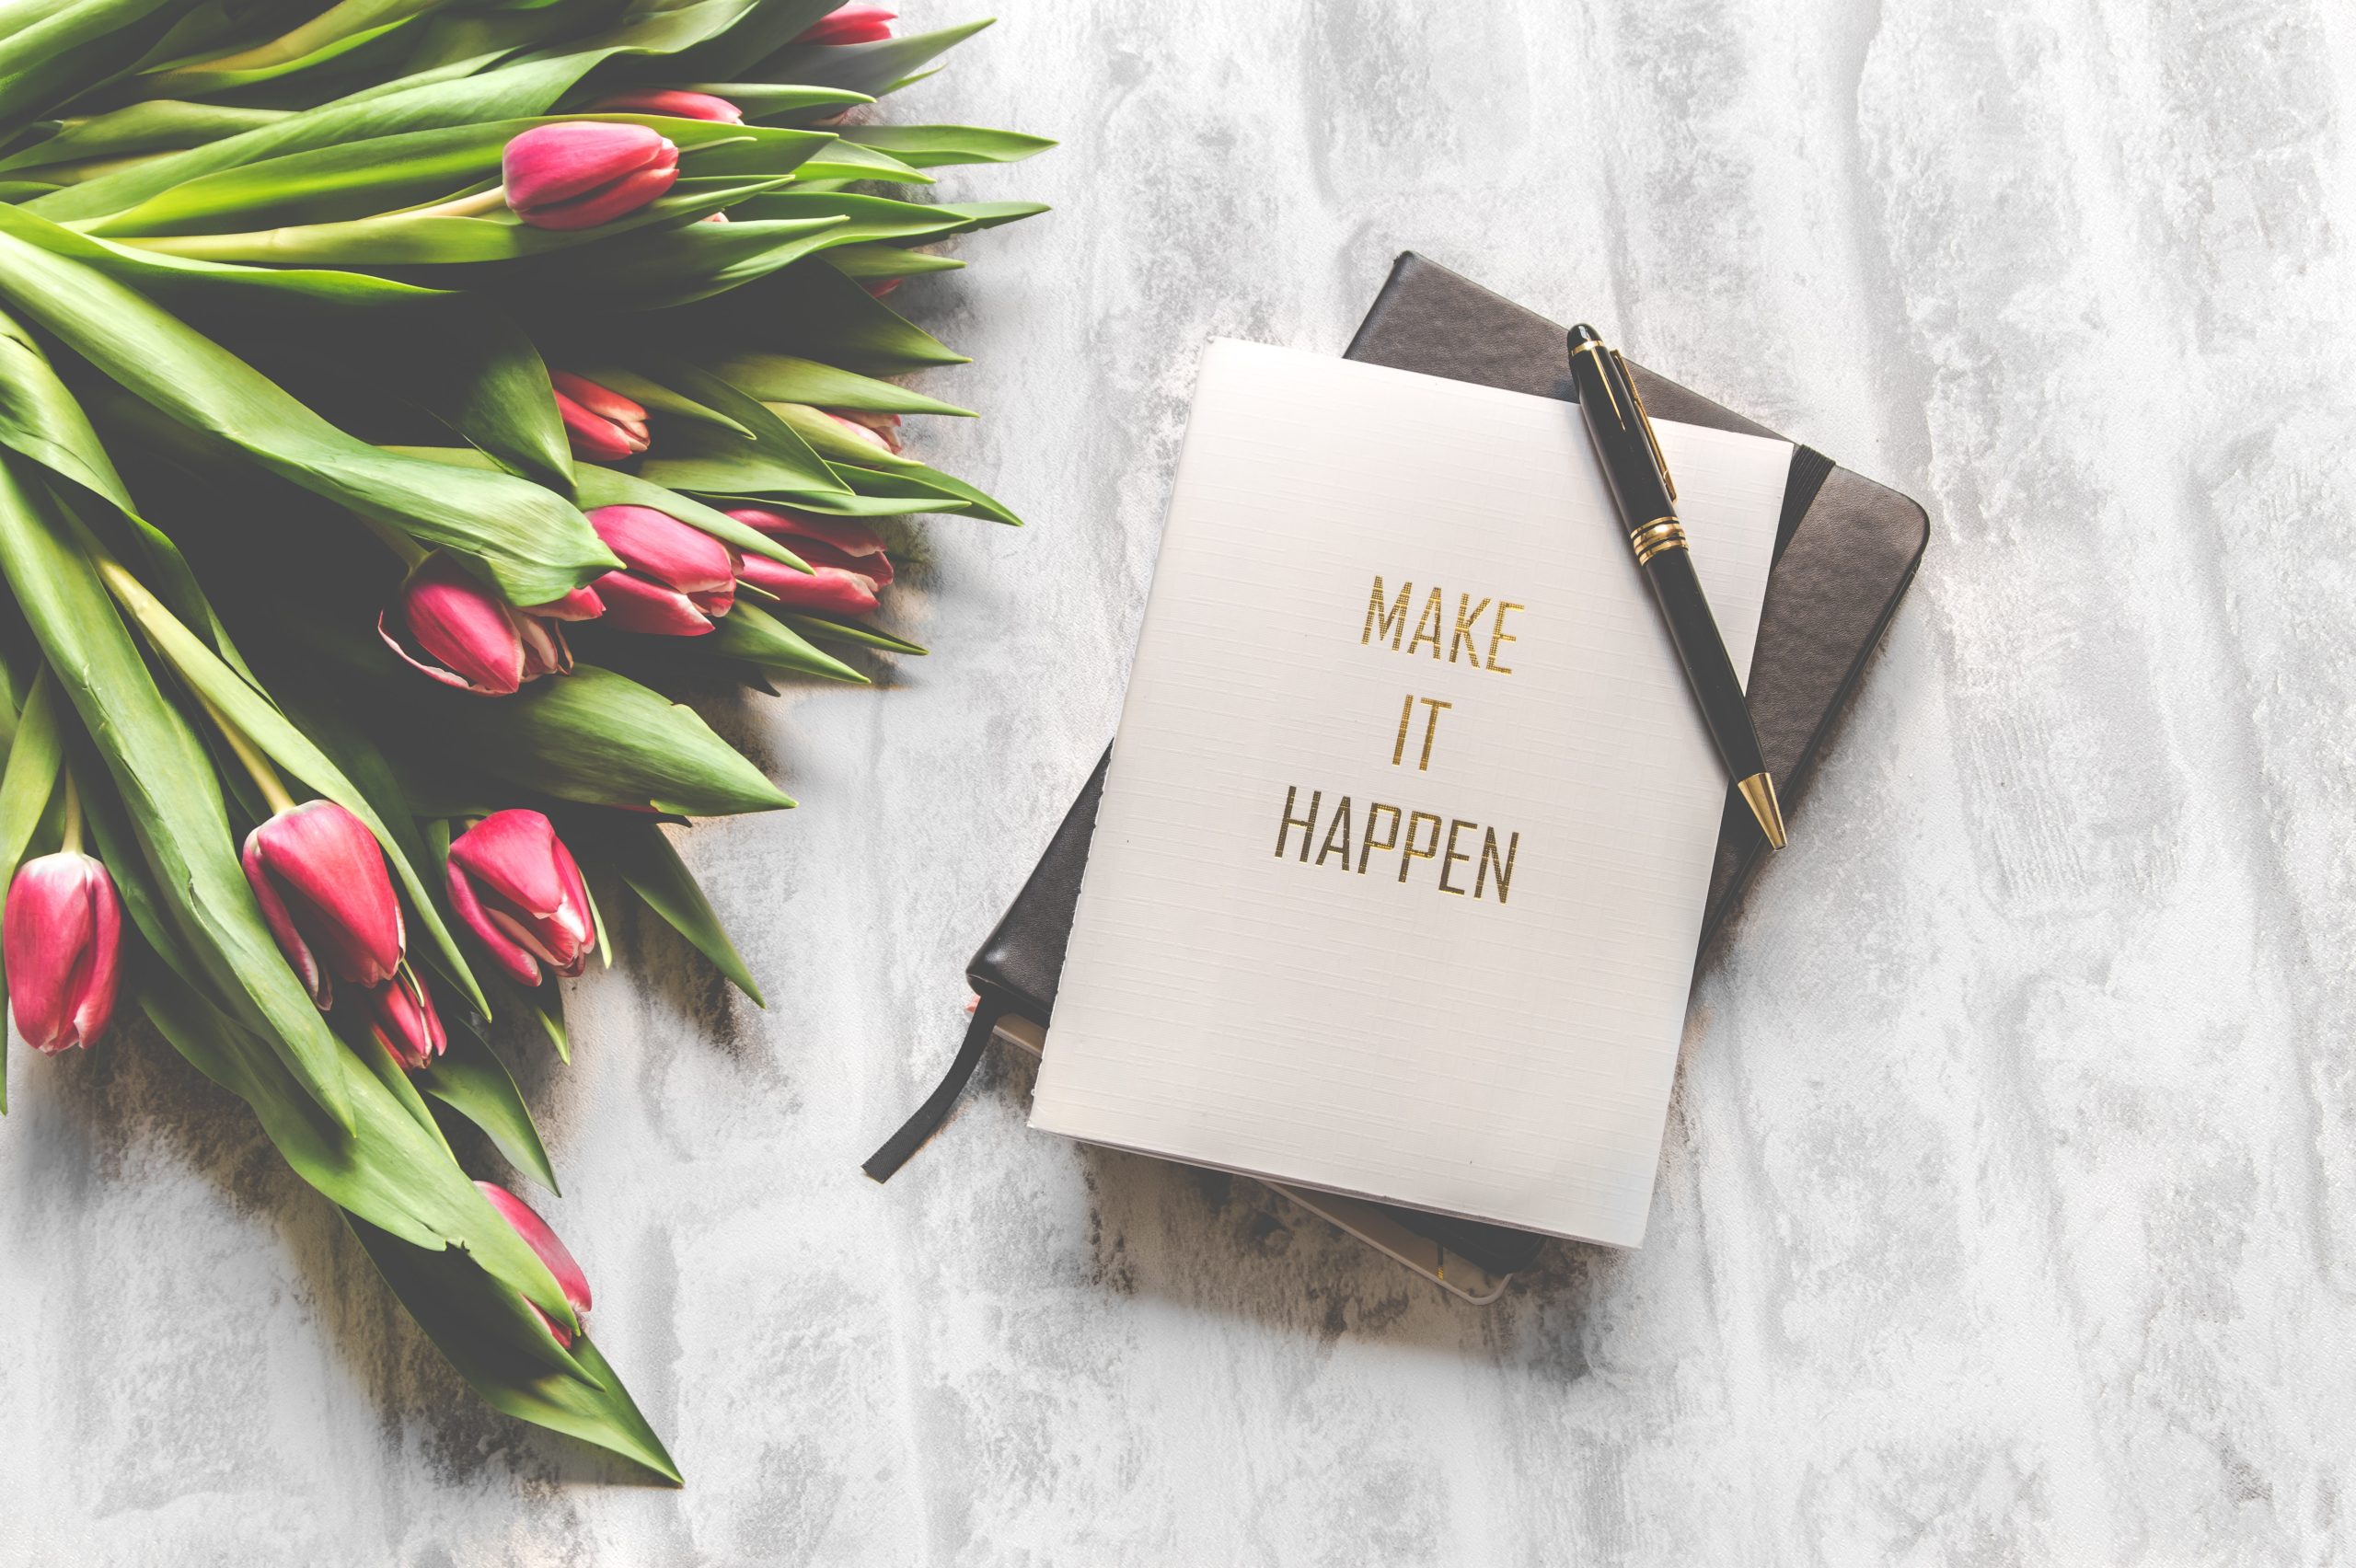 make it happen notebook for 10 life tips next to bundle of roses